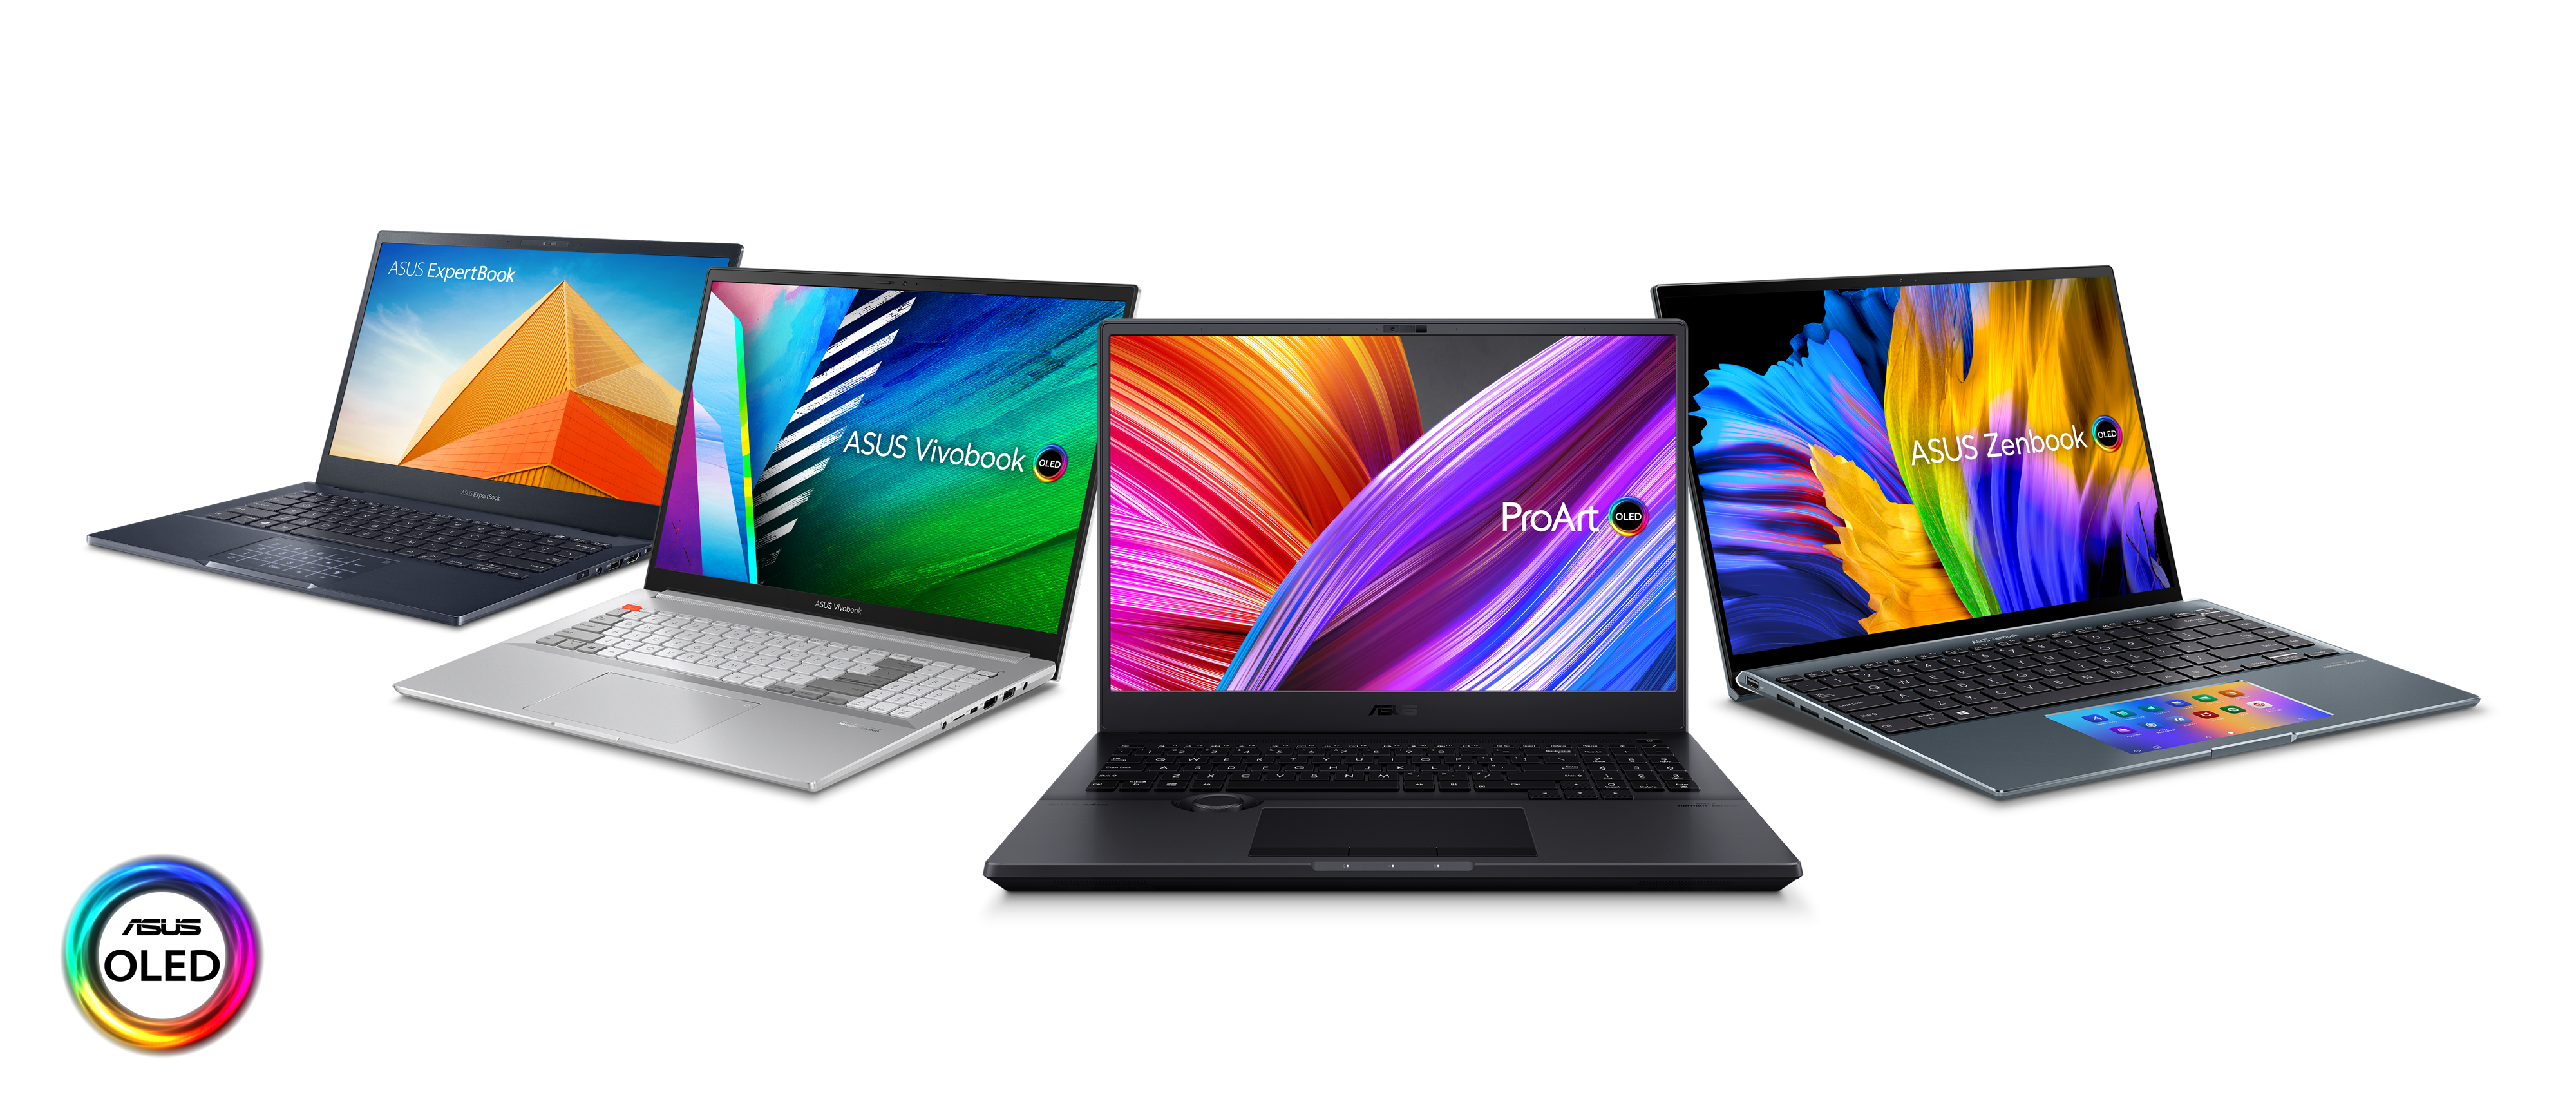 Complete ASUS OLED Laptop Lineup